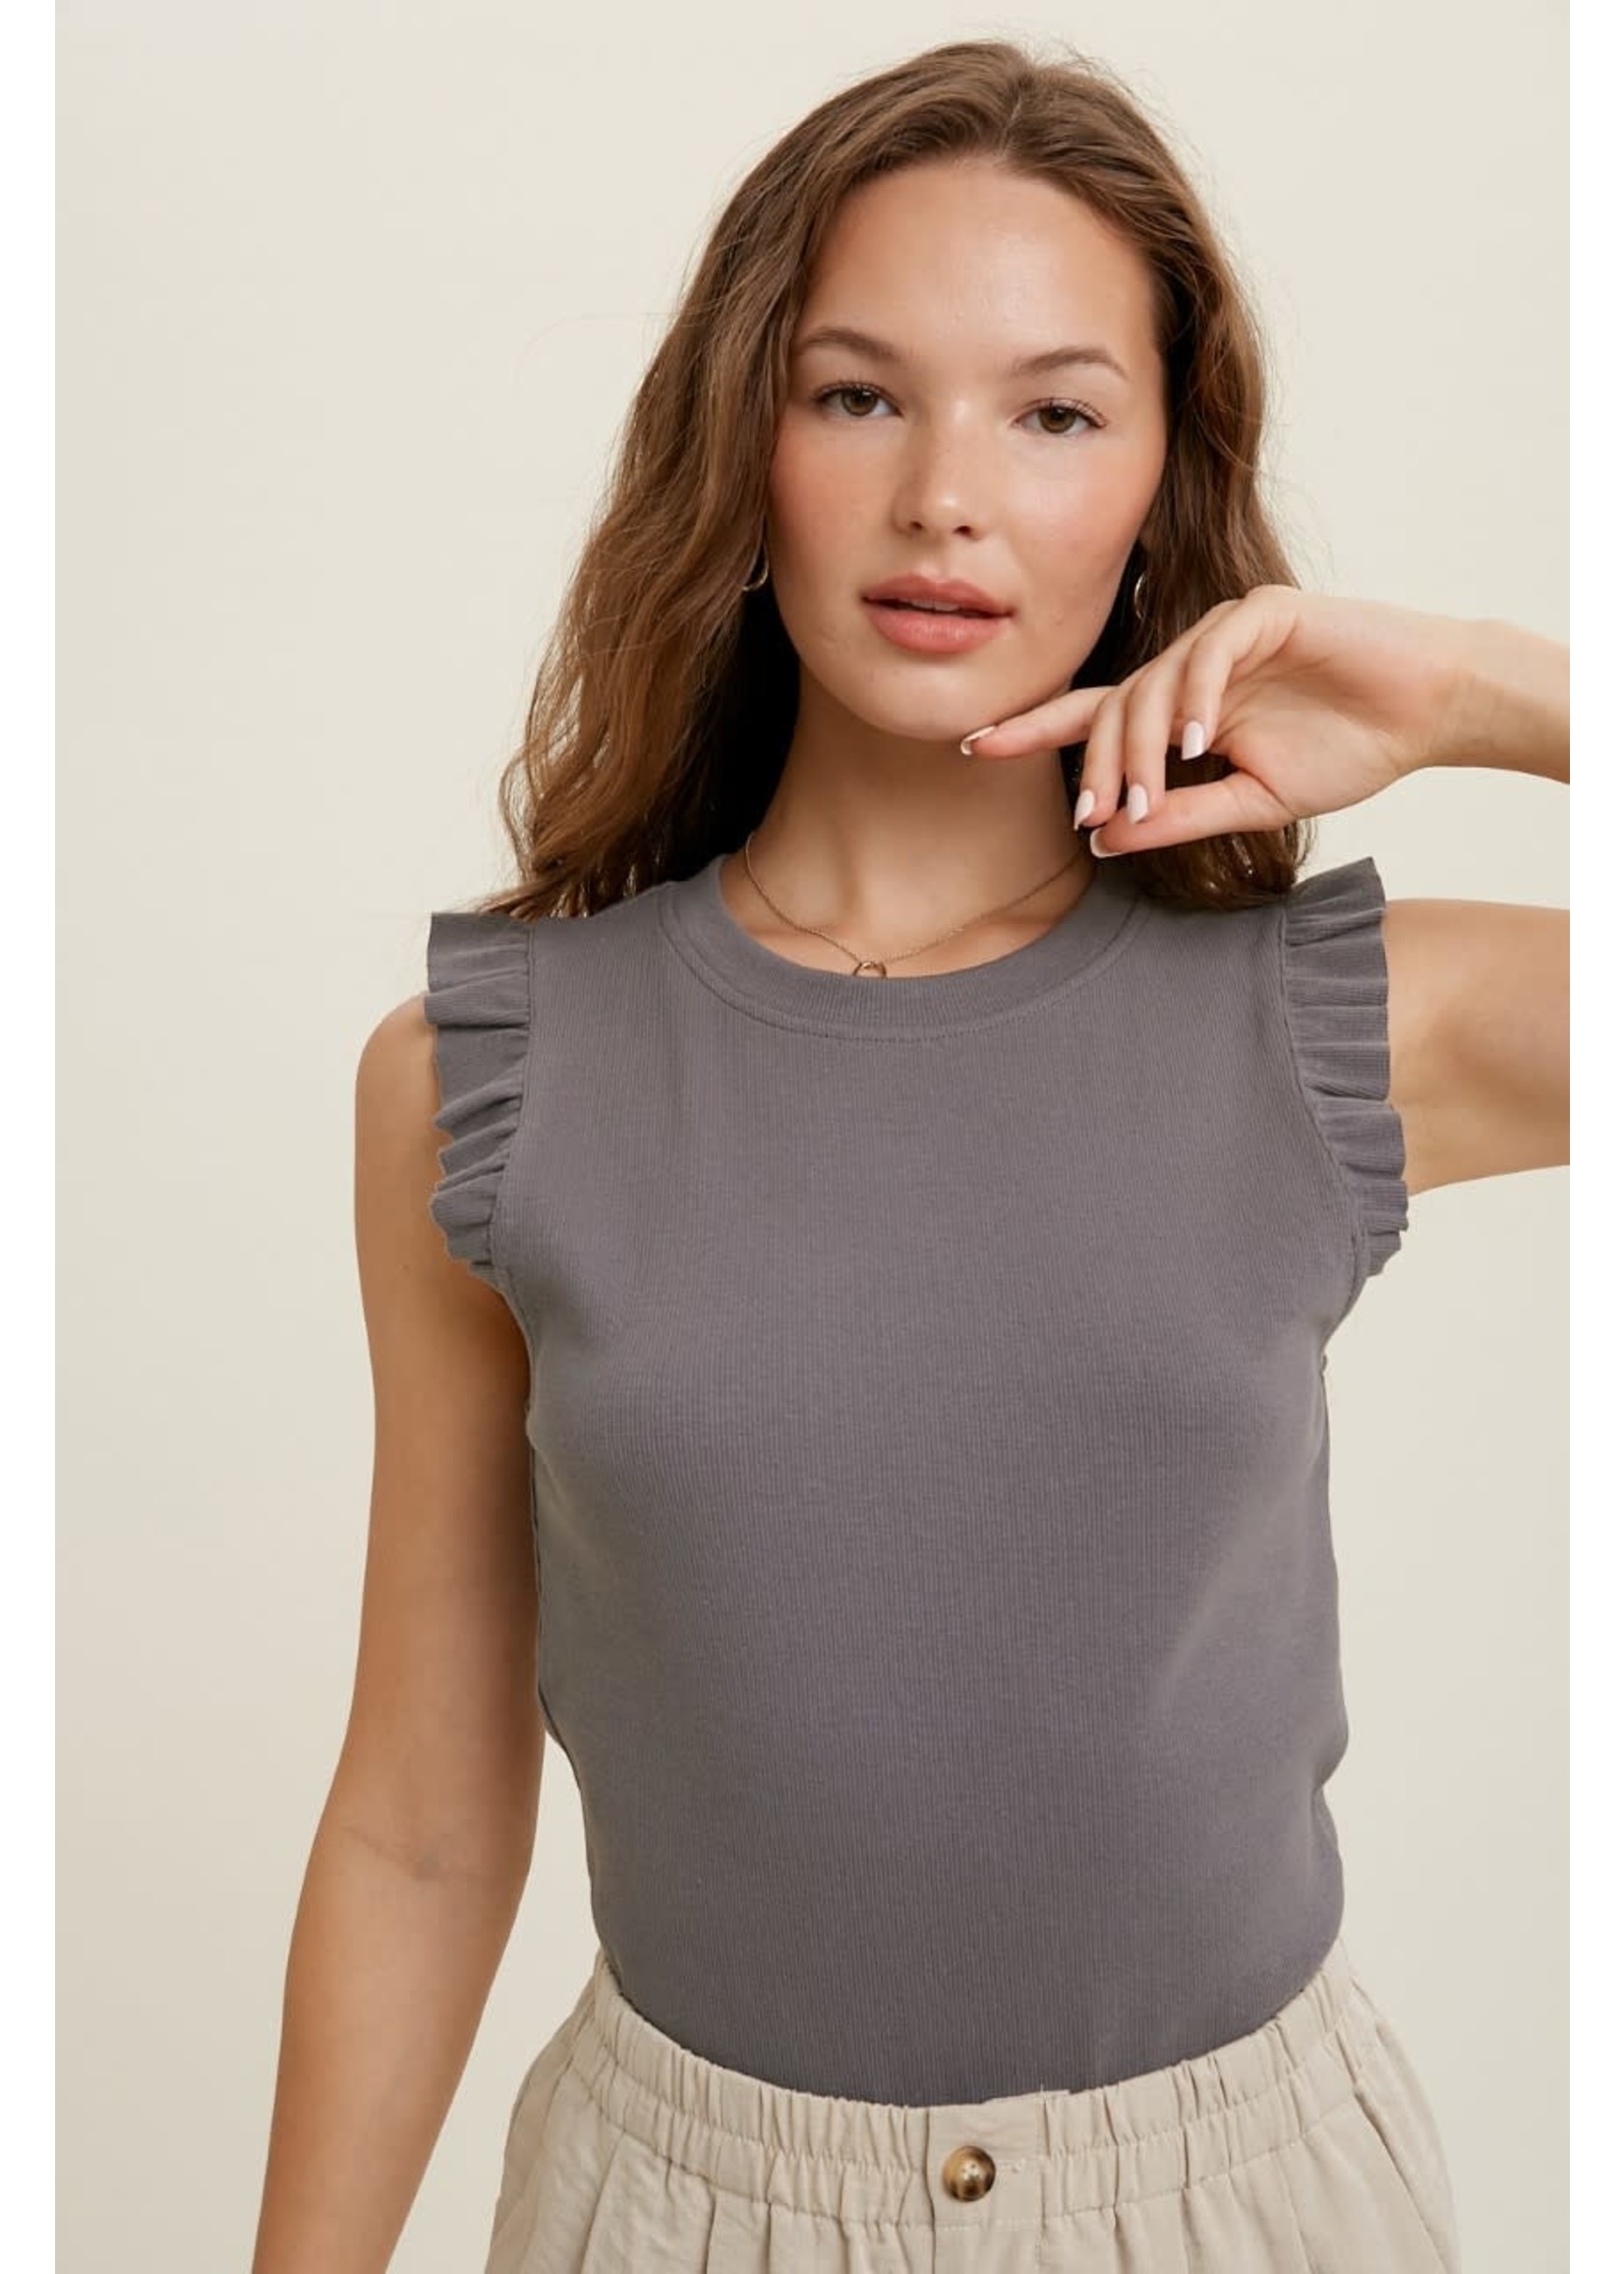 WRIBBED KNIT TANK TOP WITH RUFFLE DETAIL